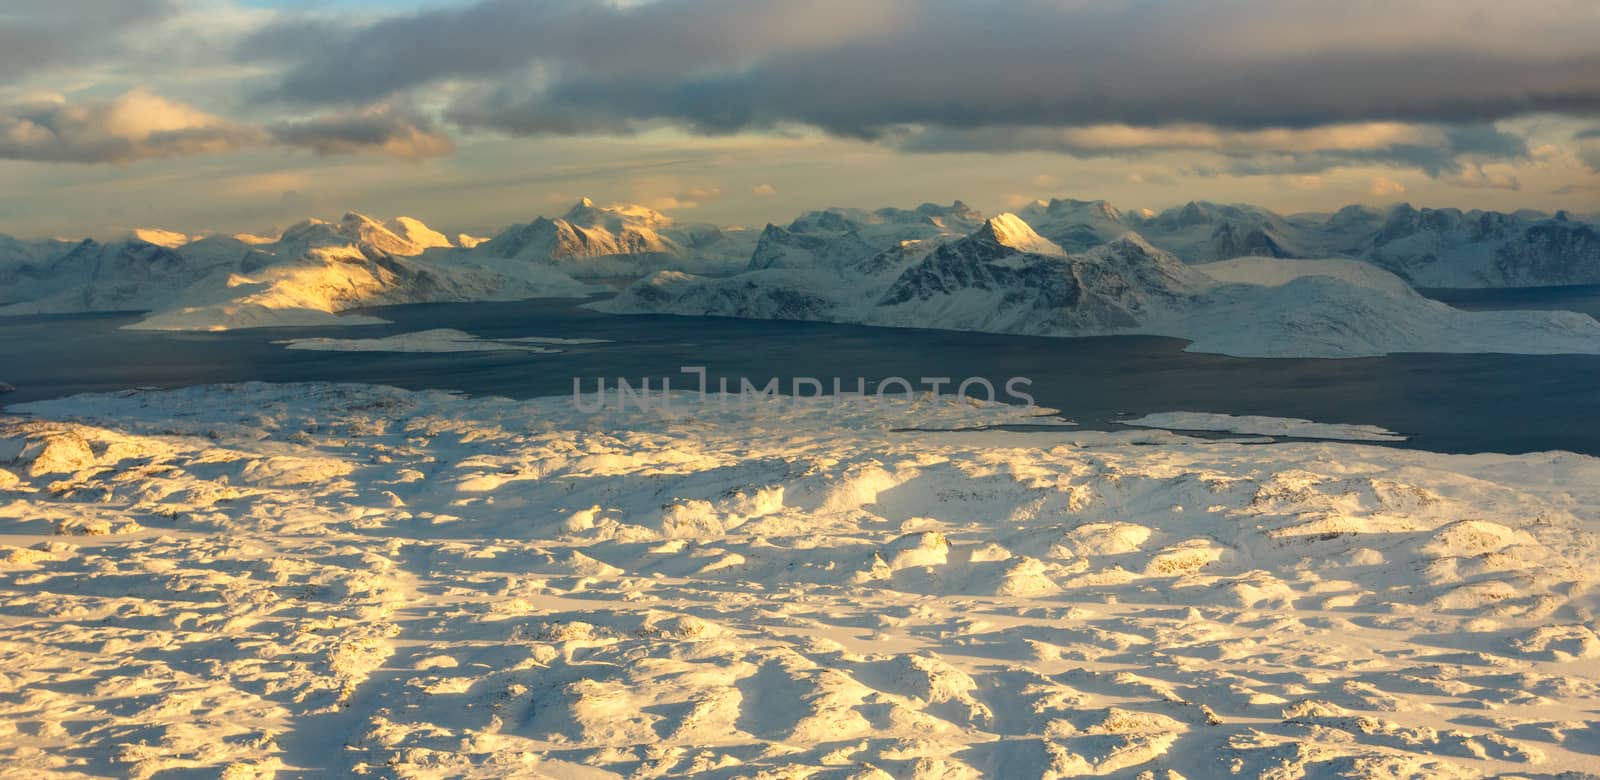 Greenlandic ice cap with wrozen mountains and fjord aerial view, near Nuuq, Greenland